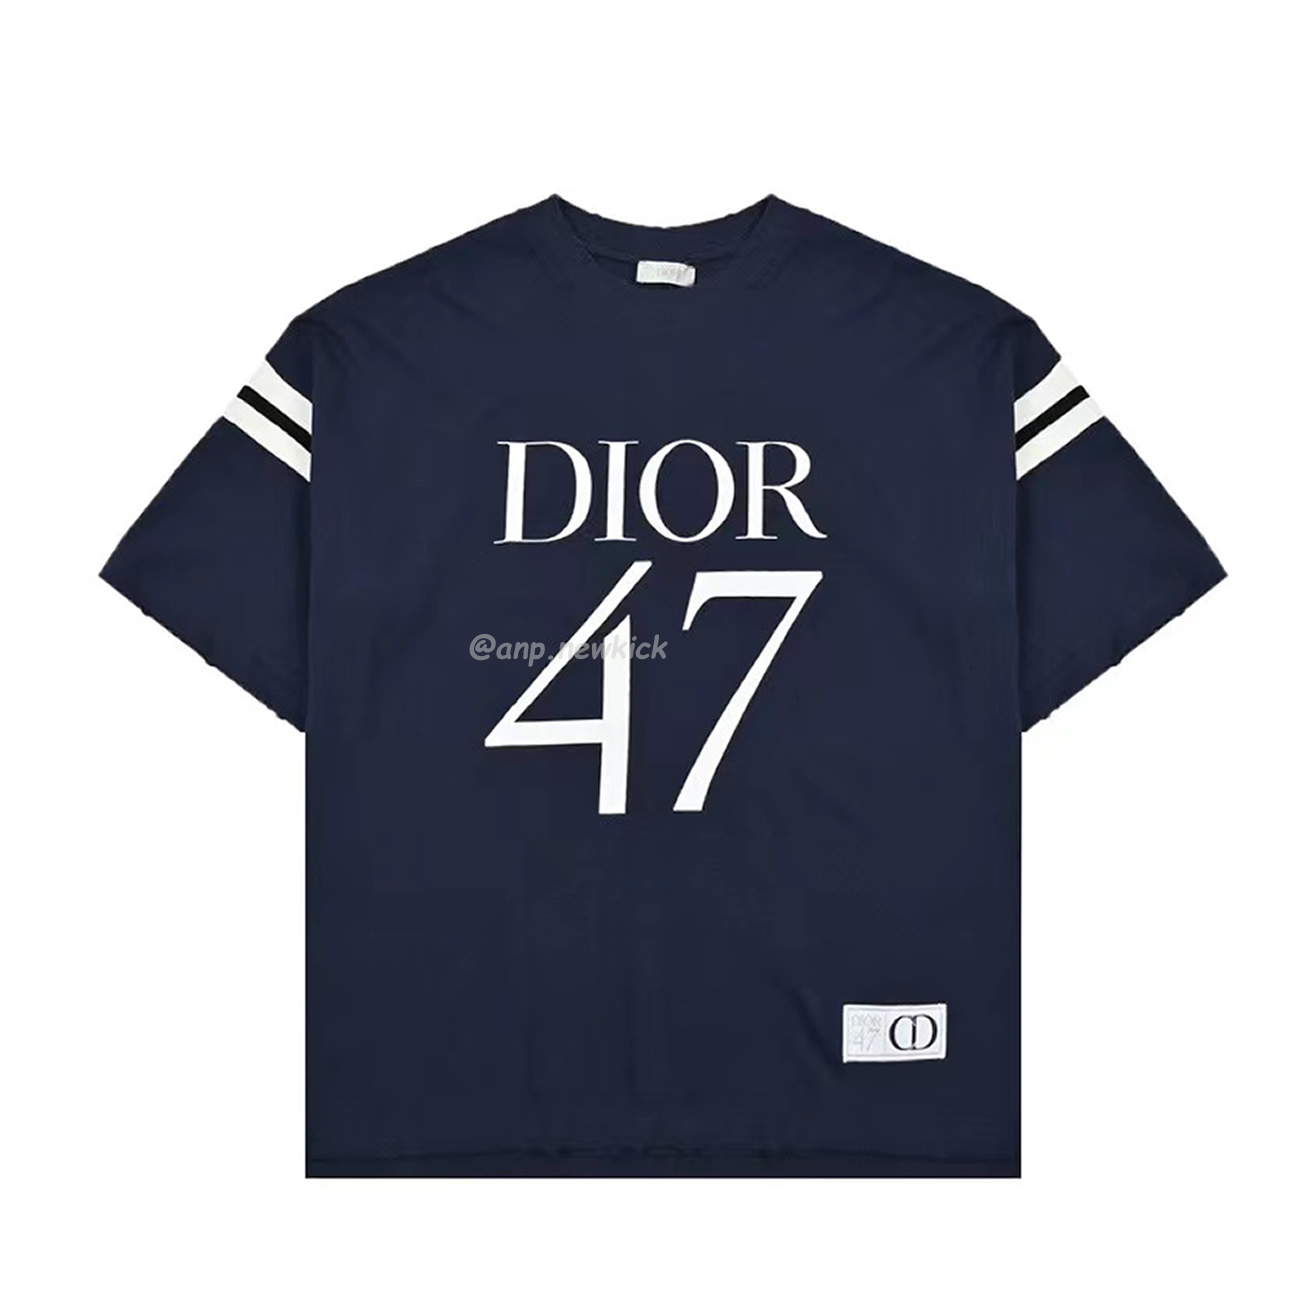 Dior Wide Body Bamboo Pure Cotton Plain Weave Fabric T Shirt White Navy (2) - newkick.org